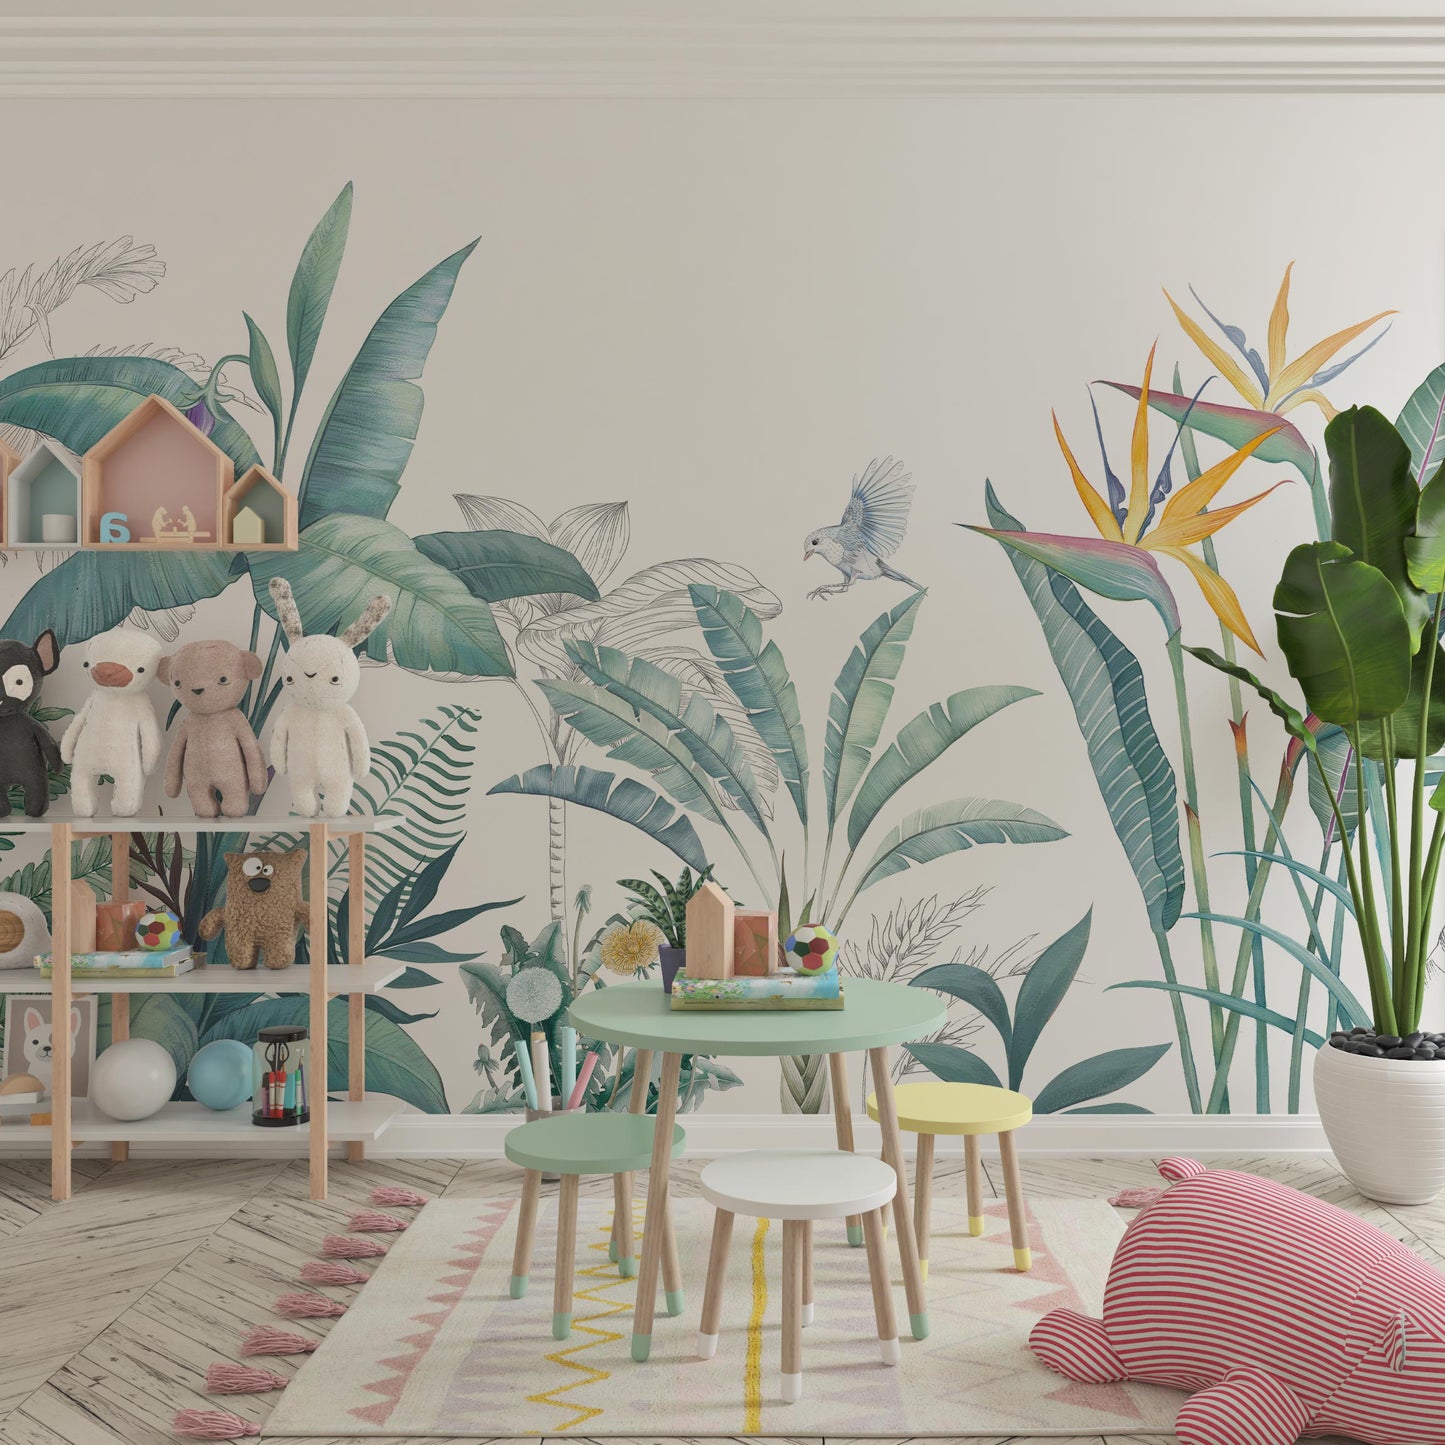 Colorful kids' room with pastel color furniture and accent wall with vintage botanical wallpaper that compliments the colors of the interior